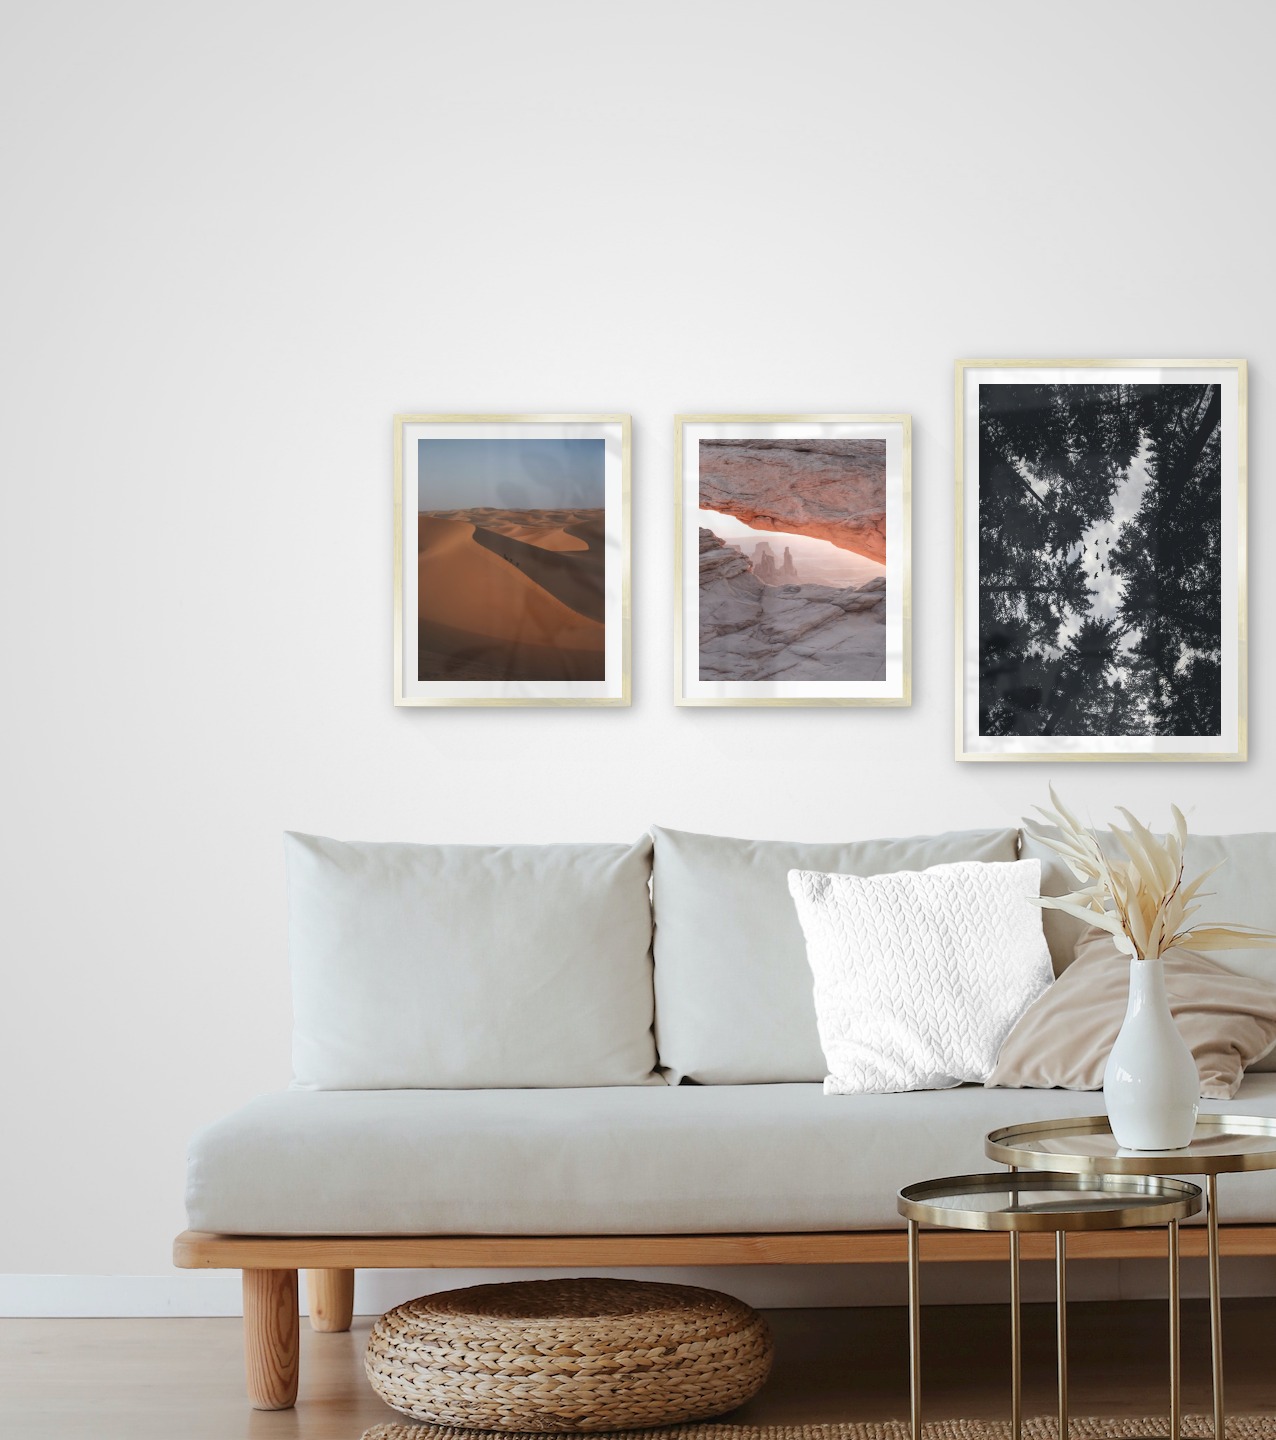 Gallery wall with picture frames in gold in sizes 40x50 and 50x70 with prints "Desert", "View between cliffs" and "Wooden tops and birds"